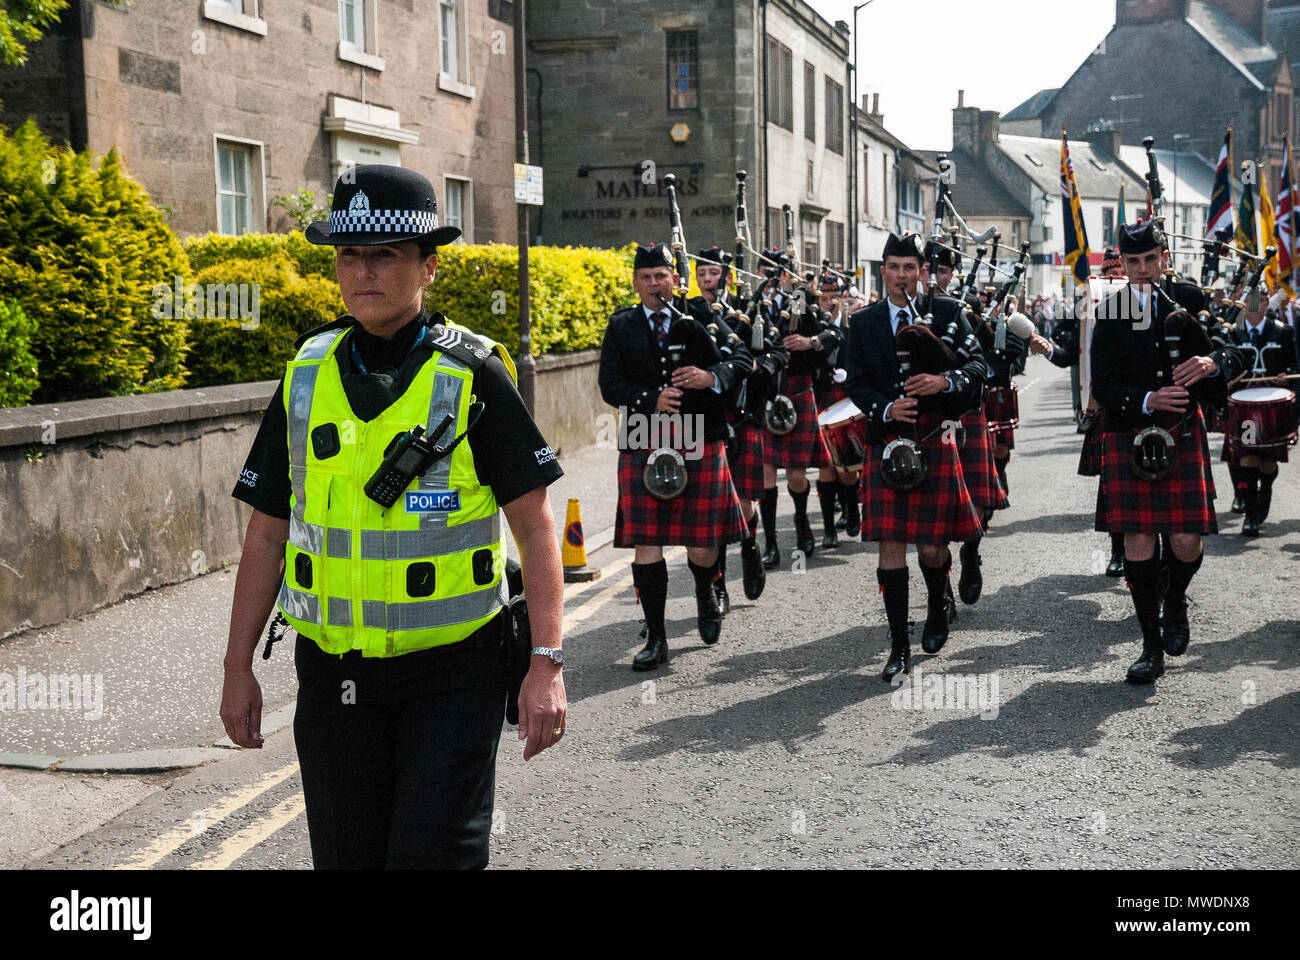 Alloa, Scotland, UK. 1st Jun, 2018. A police-woman provides an escort with members of Dollar Academy leading the parade through Alloa marking Alloa's Armed Forces Day 2018. Alloa shows its support of the UK Armed Forces as part of the UK Armed Forces Day events, this year also marks the 100th anniversary of the end of WW1 and the 100th year of the British Royal Air Force. Credit: SOPA Images Limited/Alamy Live News Stock Photo